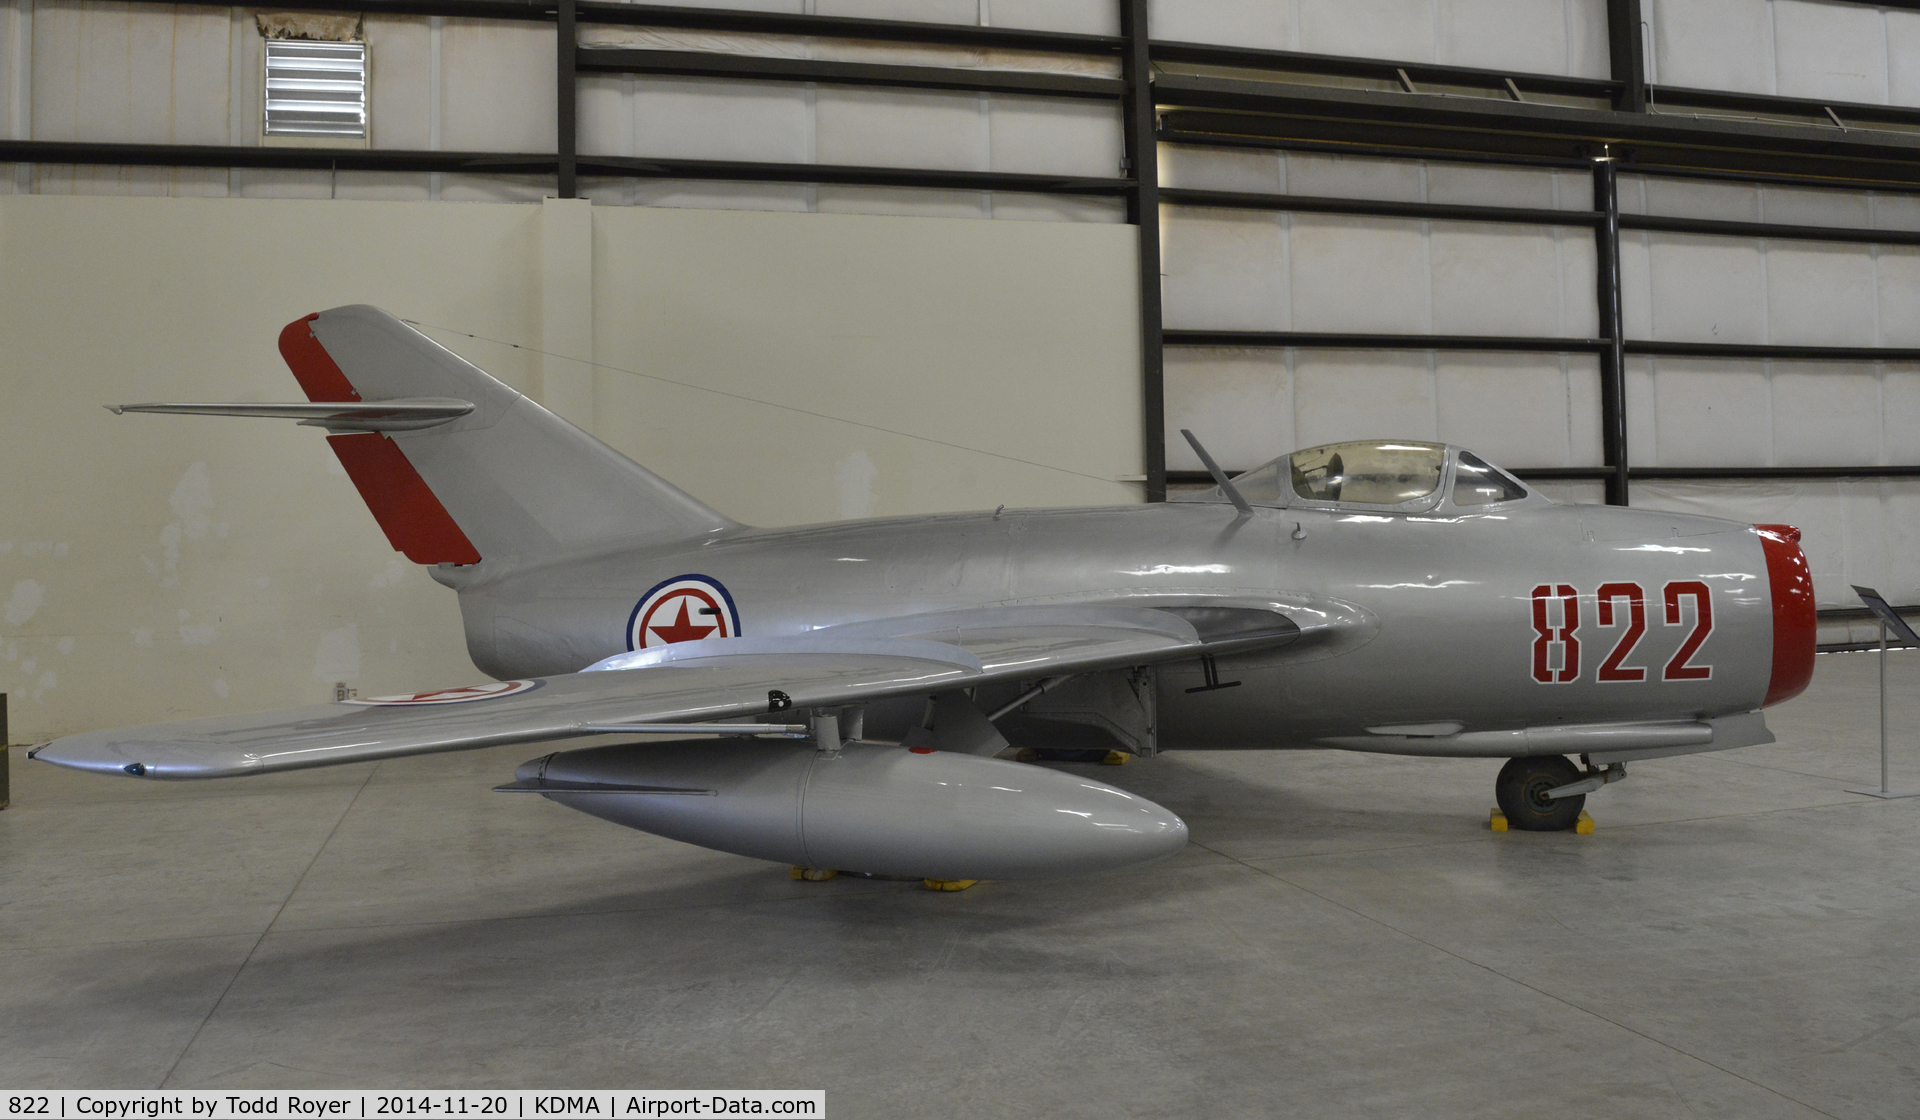 822, Mikoyan-Gurevich MiG-15bis C/N 1B00822, On Display at the Pima Air and Space Museum